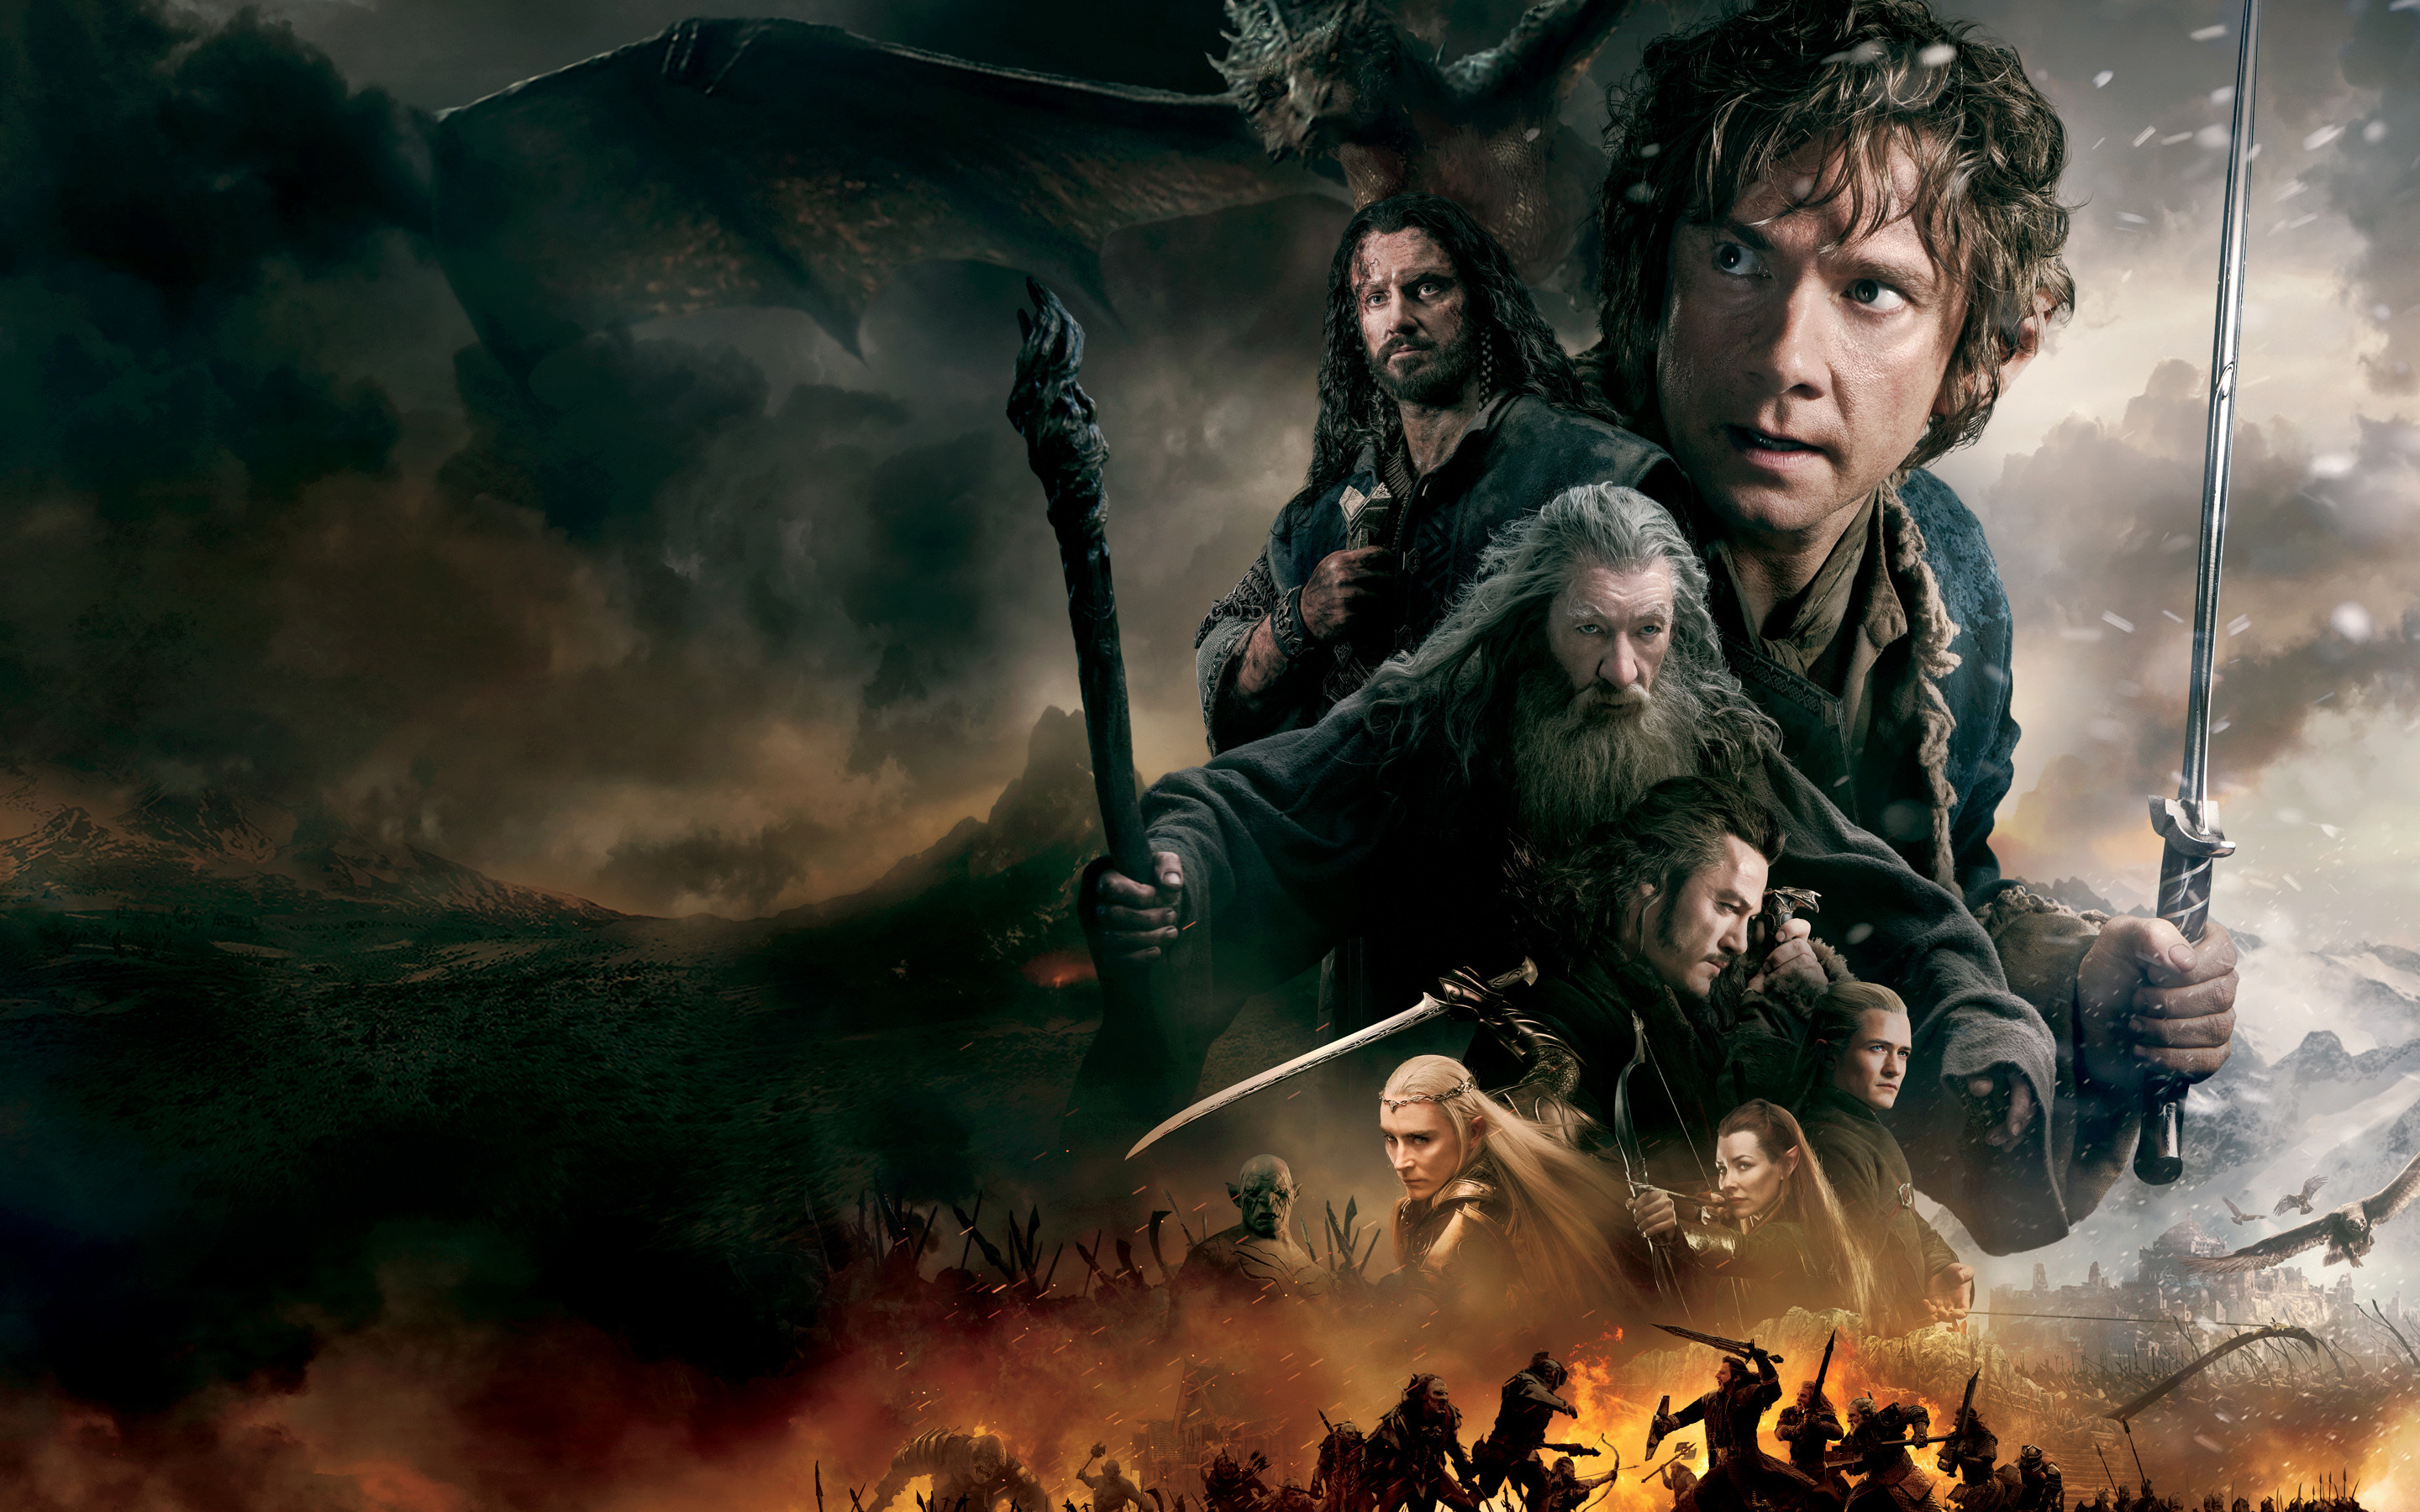 2880x1800 The Hobbit The Battle of the Five Armies 2014